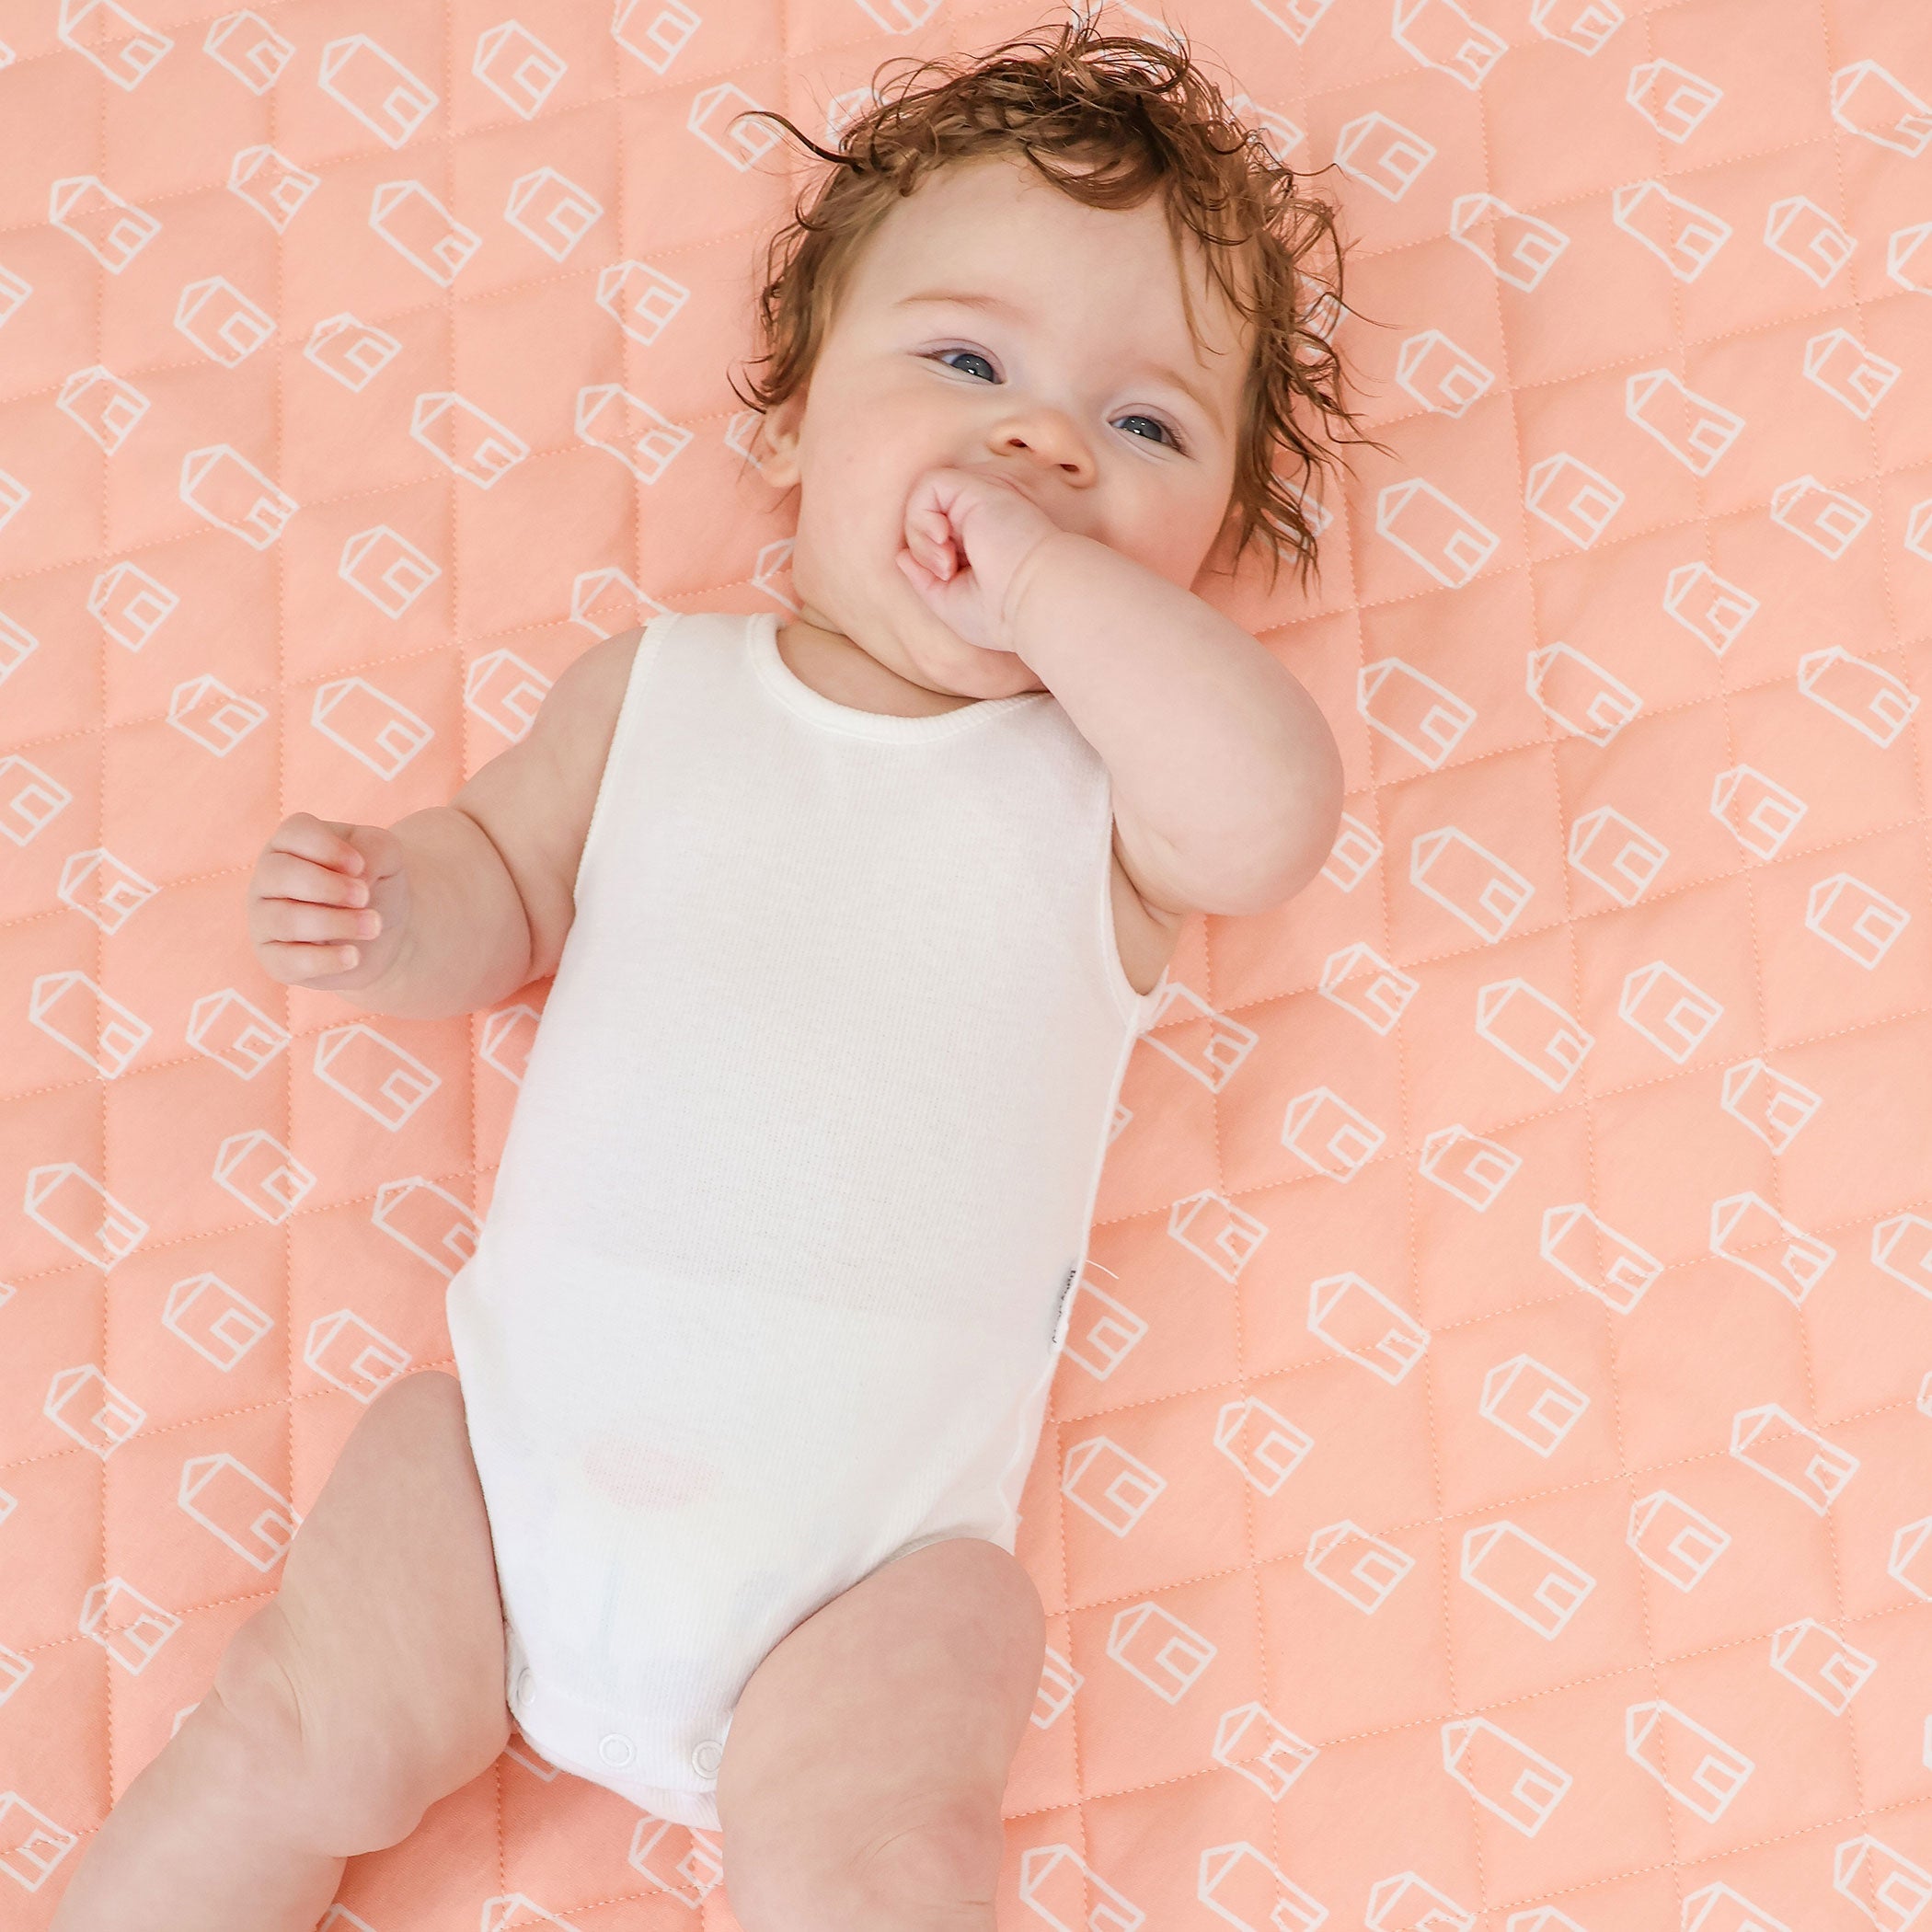 Nordic Reversible Cot Quilt/Playmat Coral/Tiffany